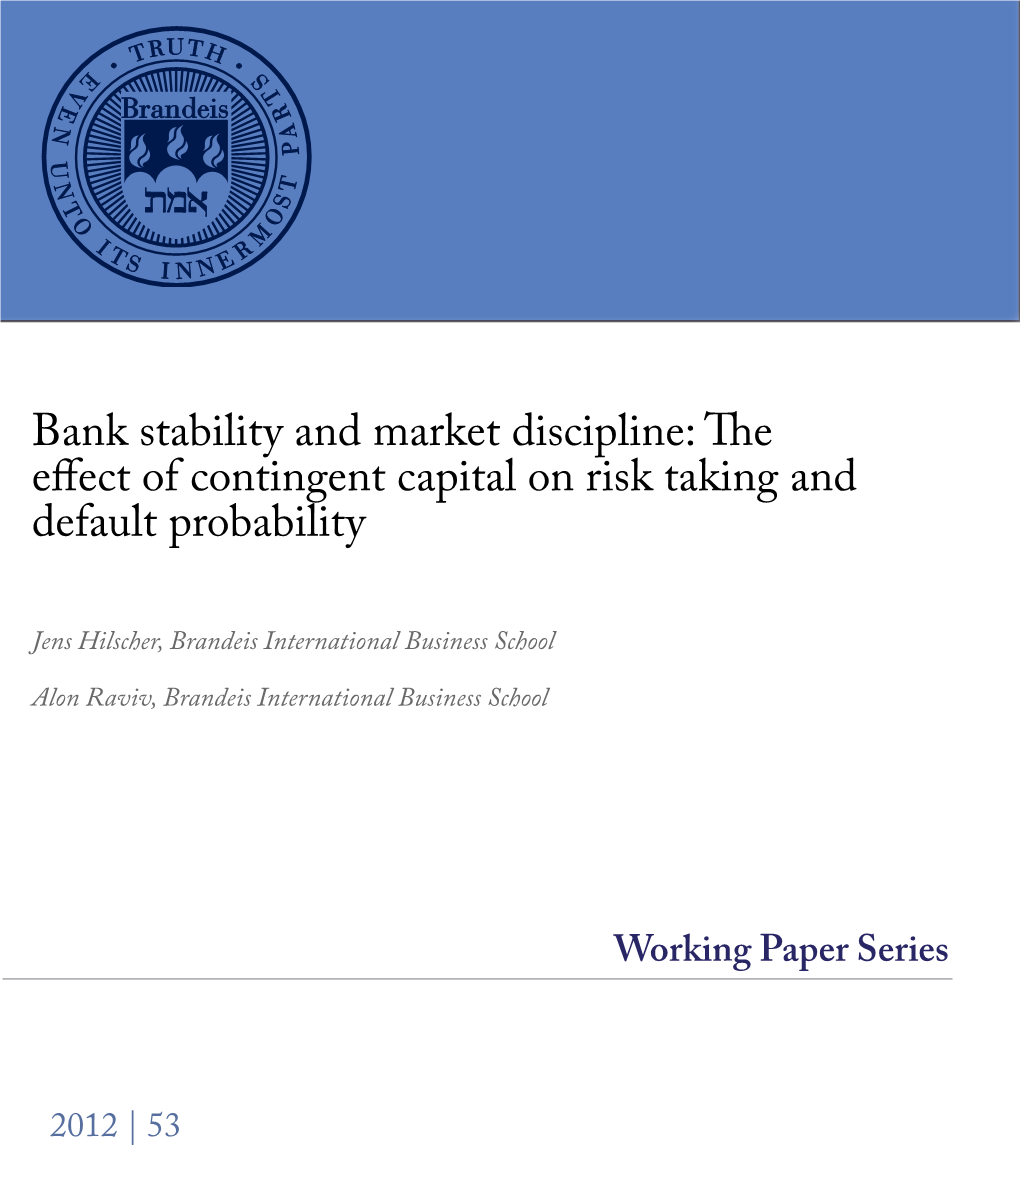 Bank Stability and Market Discipline: the Effect of Contingent Capital on Risk Taking and Default Probability